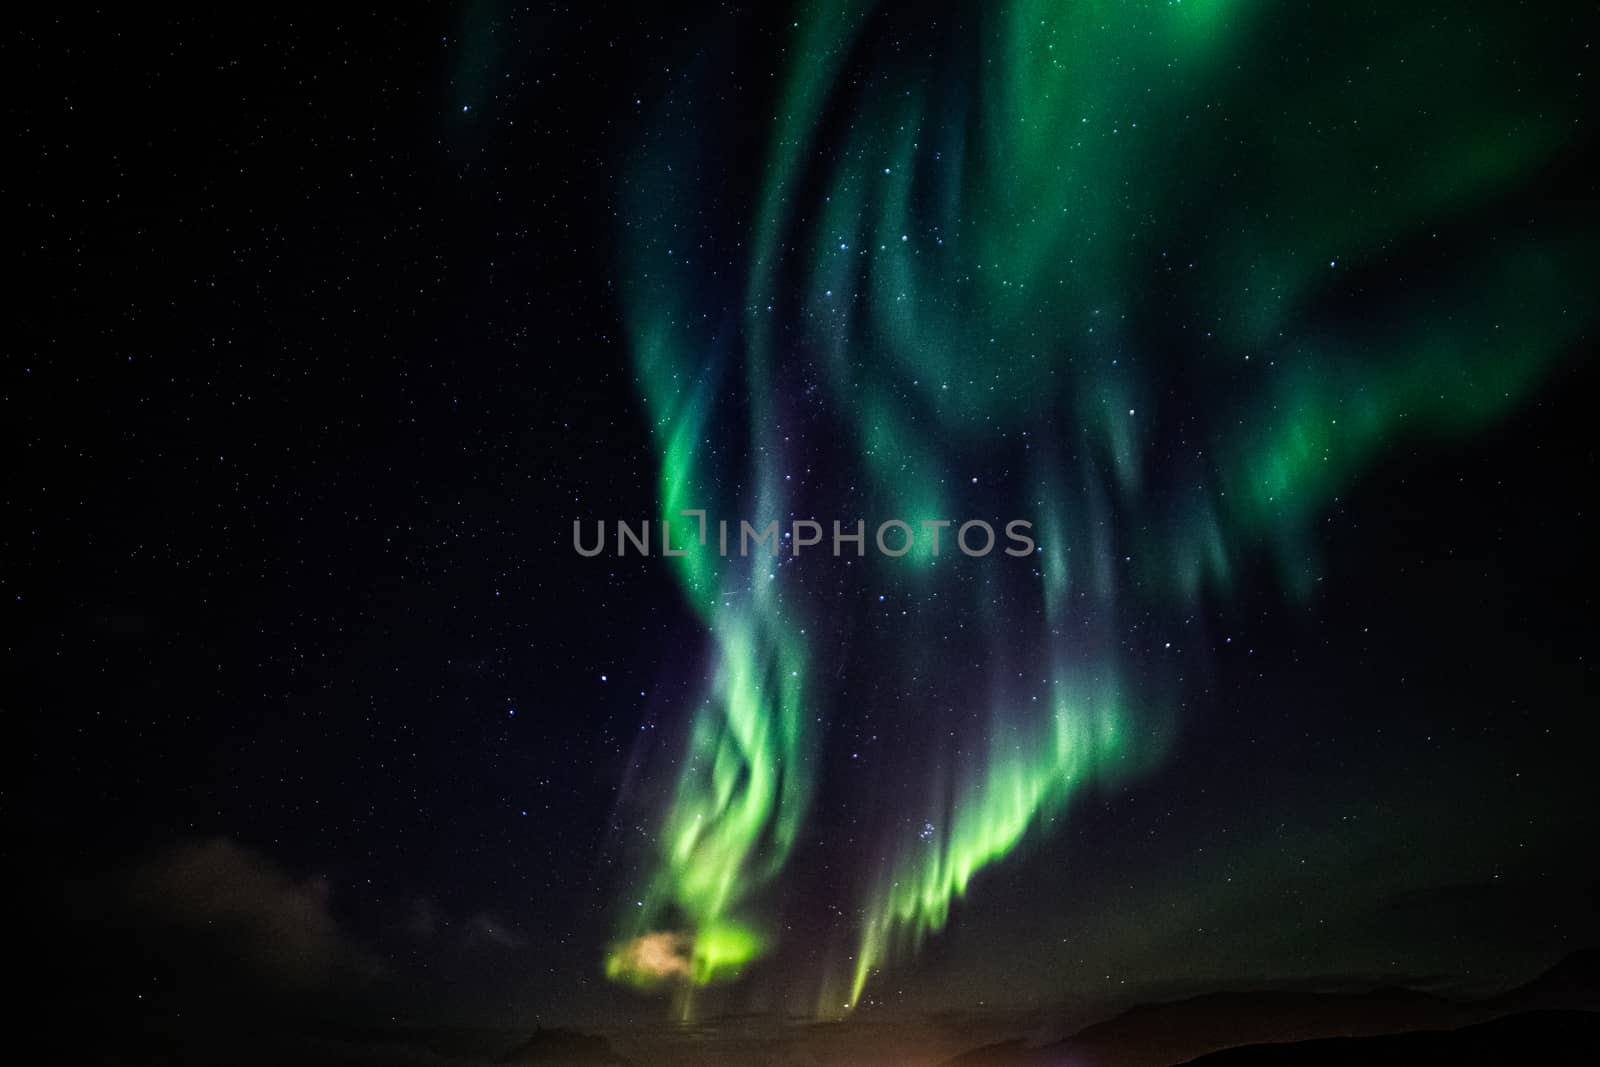 Massive green Aurora Borealis Northern lights shining over the l by ambeon